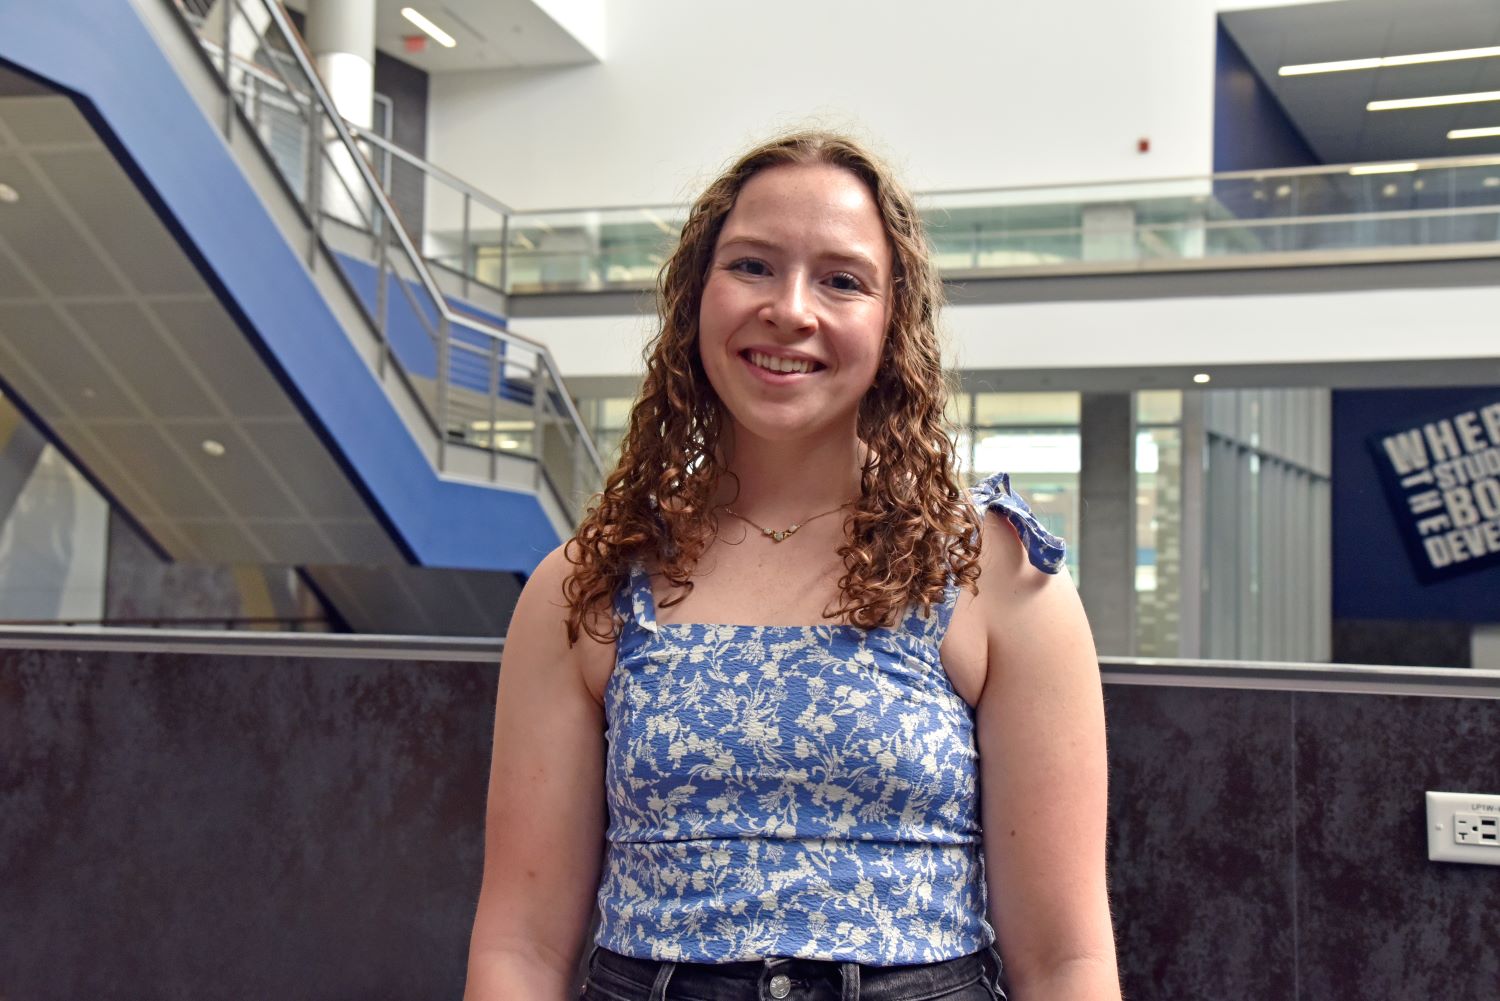 Catherine Mydosh ‘23 (CAHNR), a major in exercise science in the Department of Kinesiology in the College of Agriculture, Health and Natural Resources, poses for a portrait for Commencement 2023 inside the Student Recreation Center (SRC). Apr. 12, 2023. (Jason Sheldon/UConn Photo)